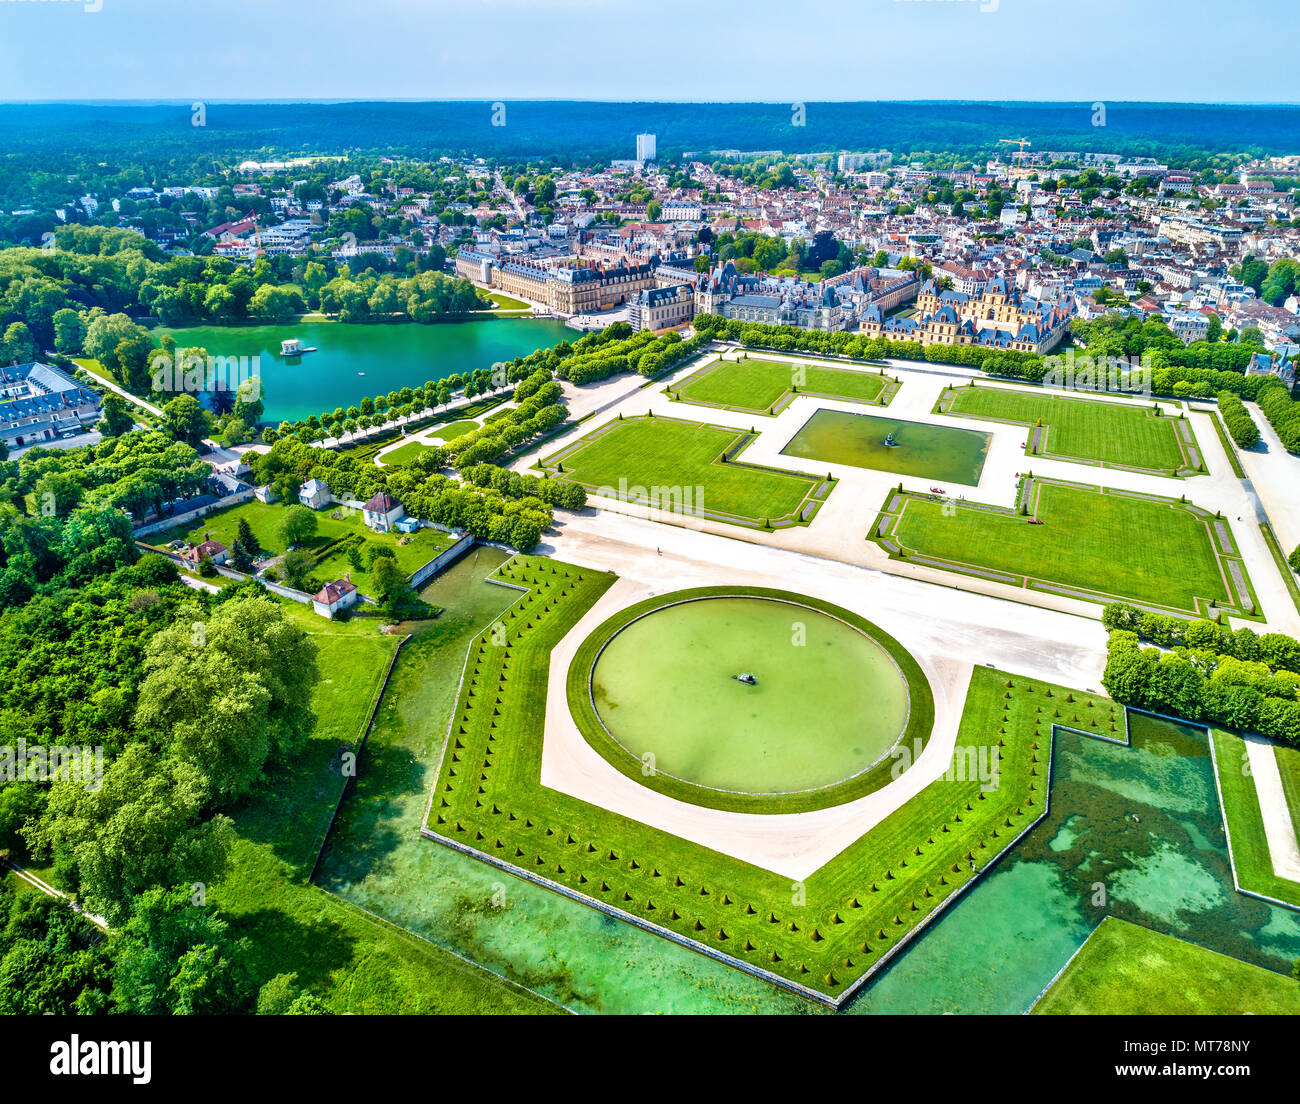 Aerial View Of Chateau De Fontainebleau With Its Gardens A Unesco